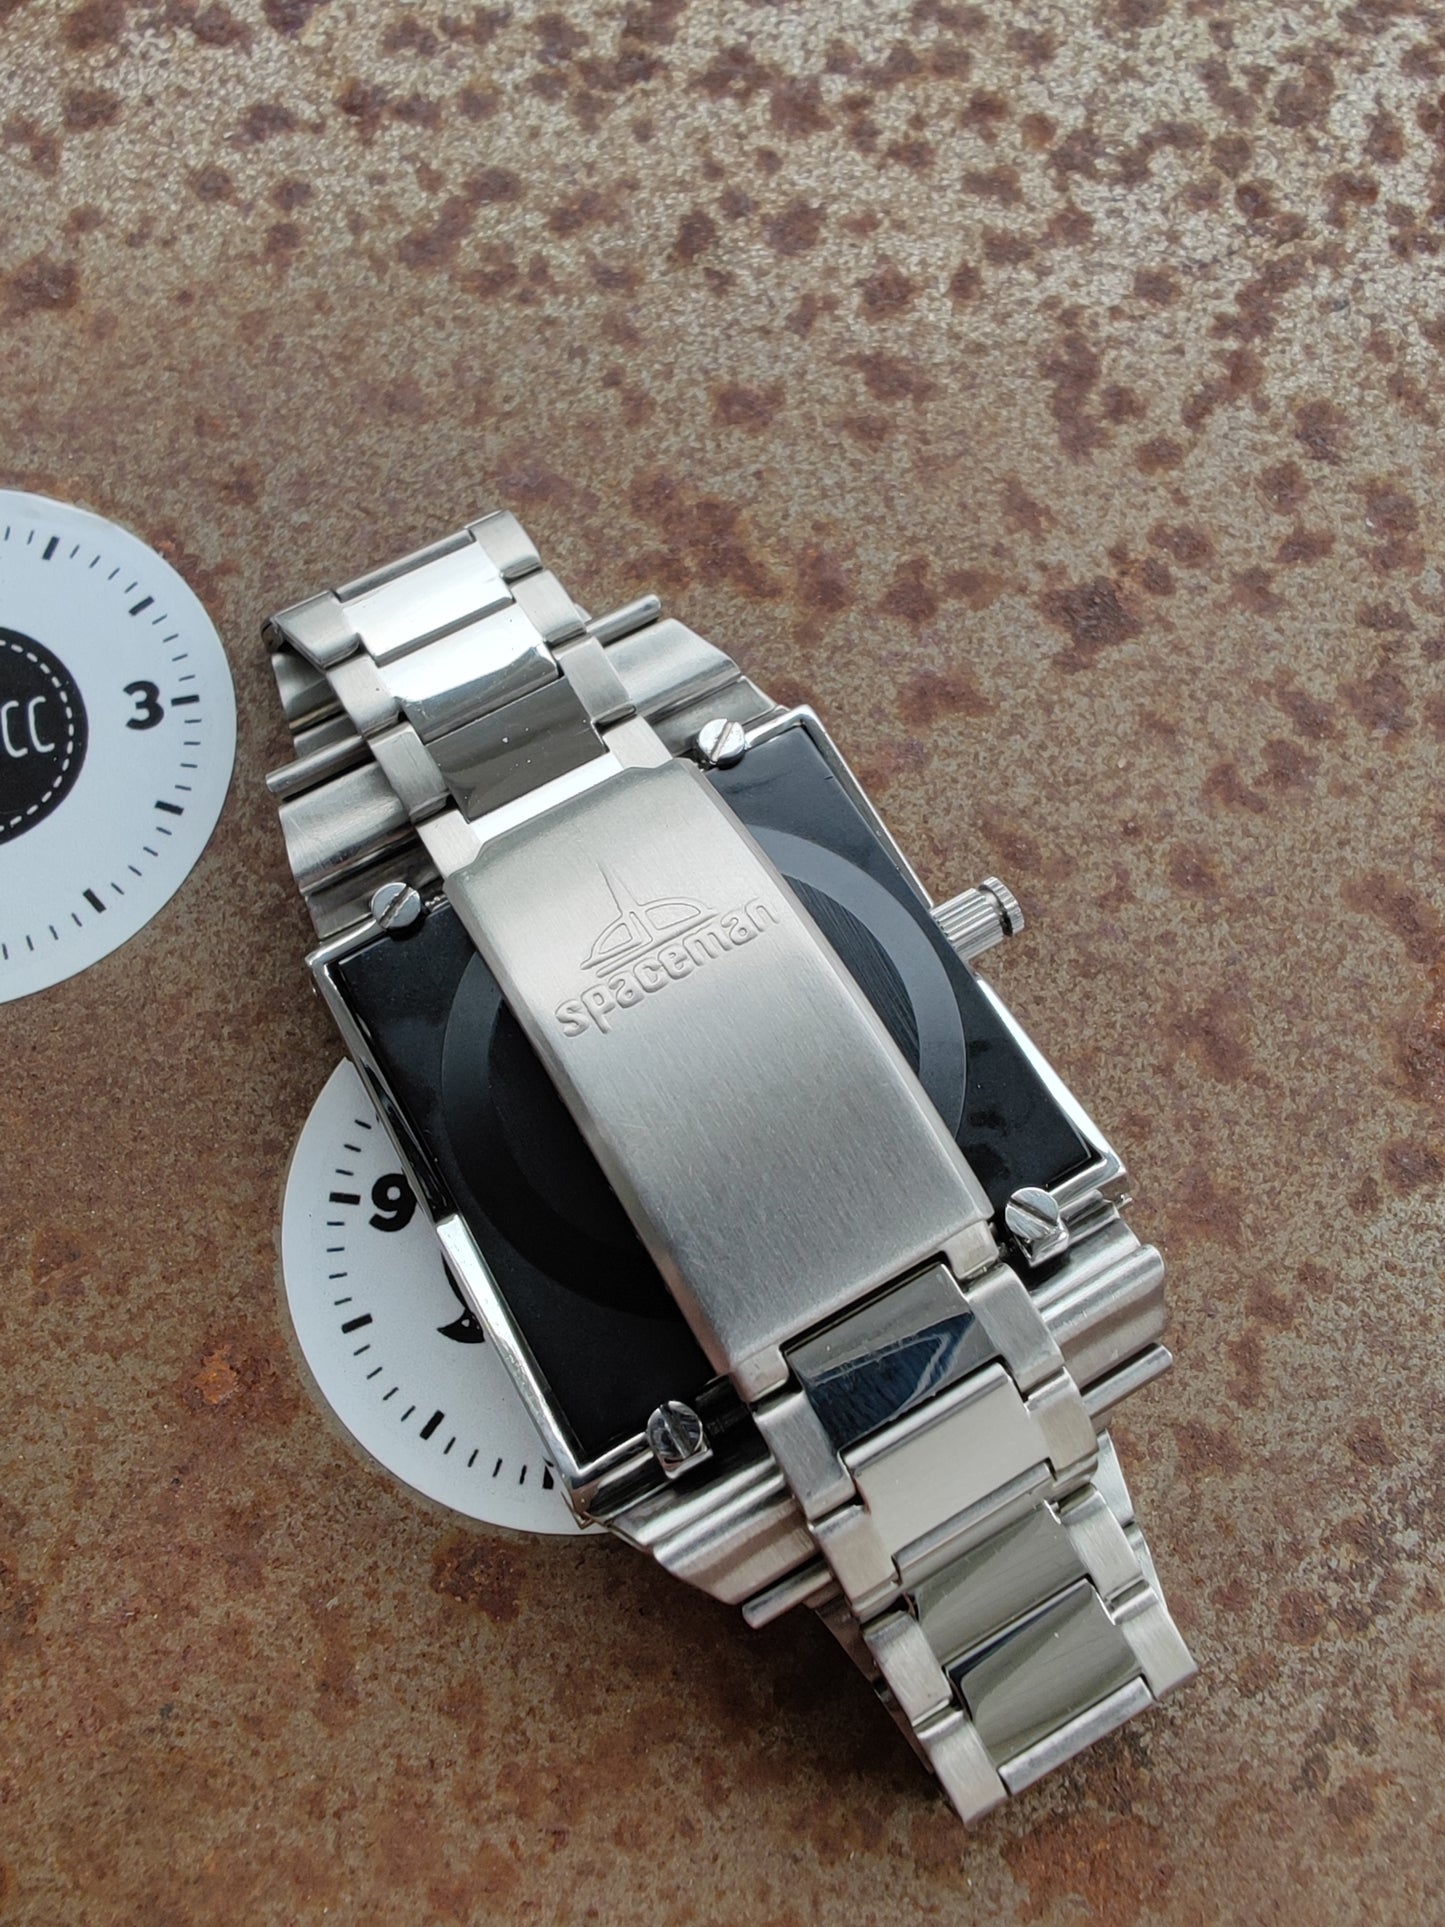 MINT+++ FORTIS Spaceman Audacieuse Automatic